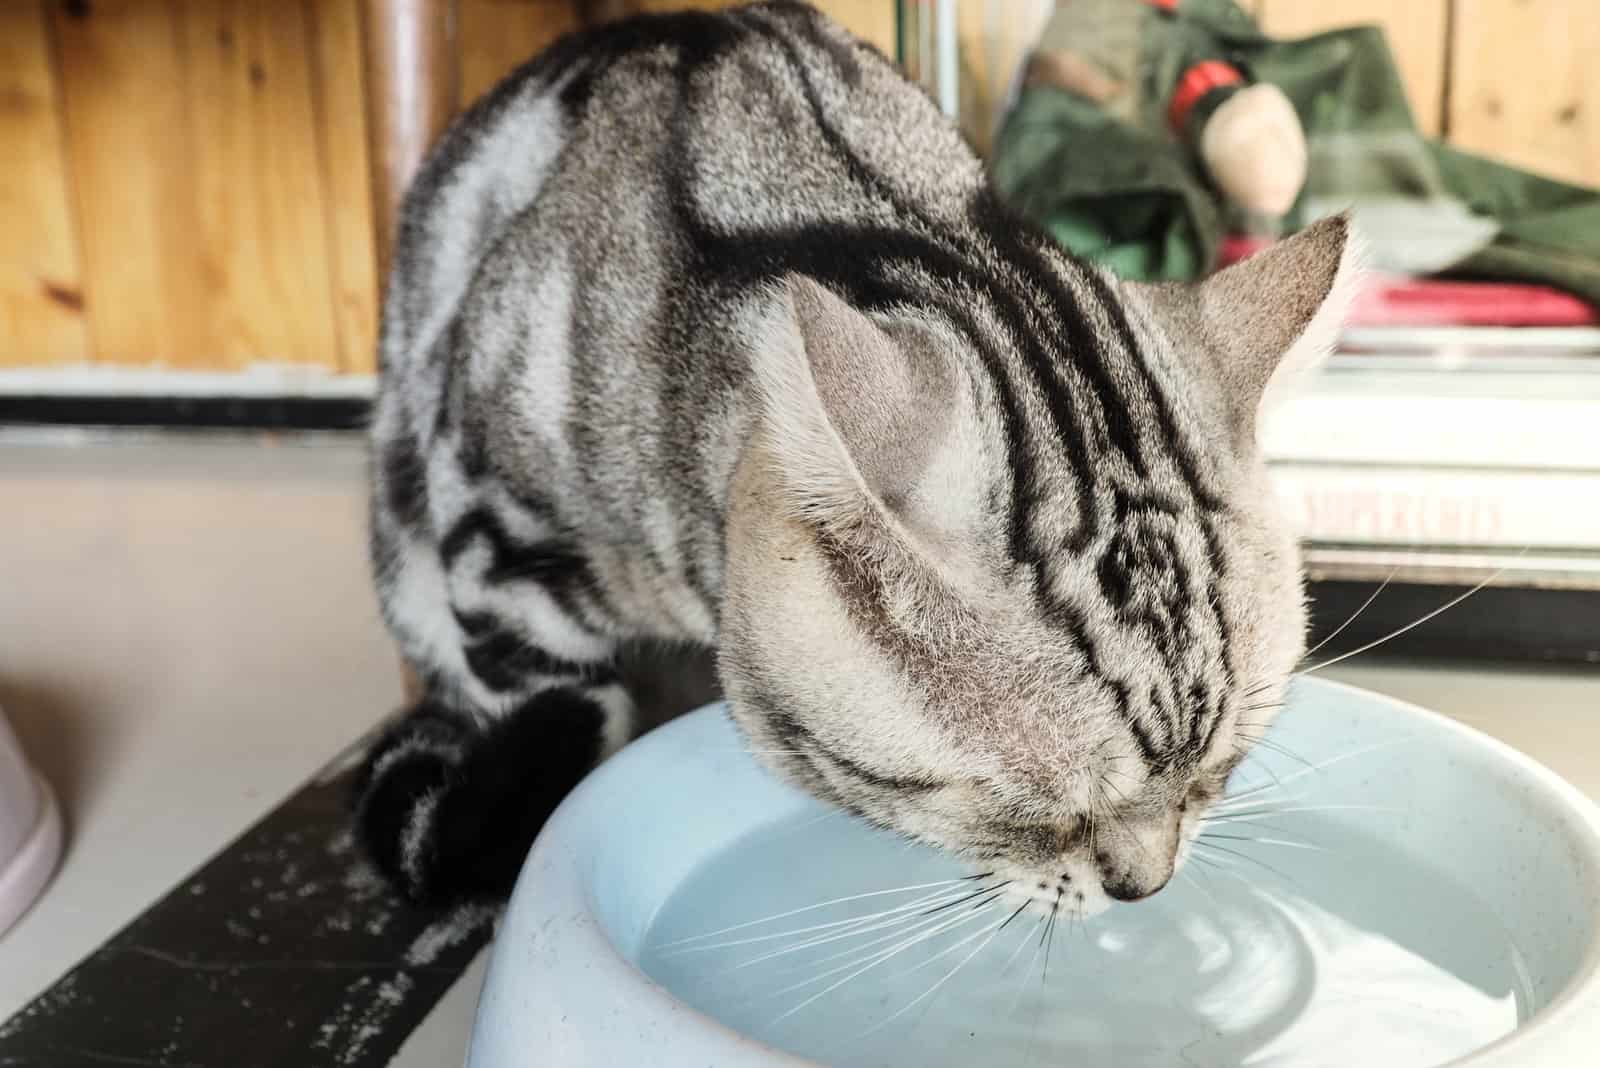 the cat drinks water from a bowl